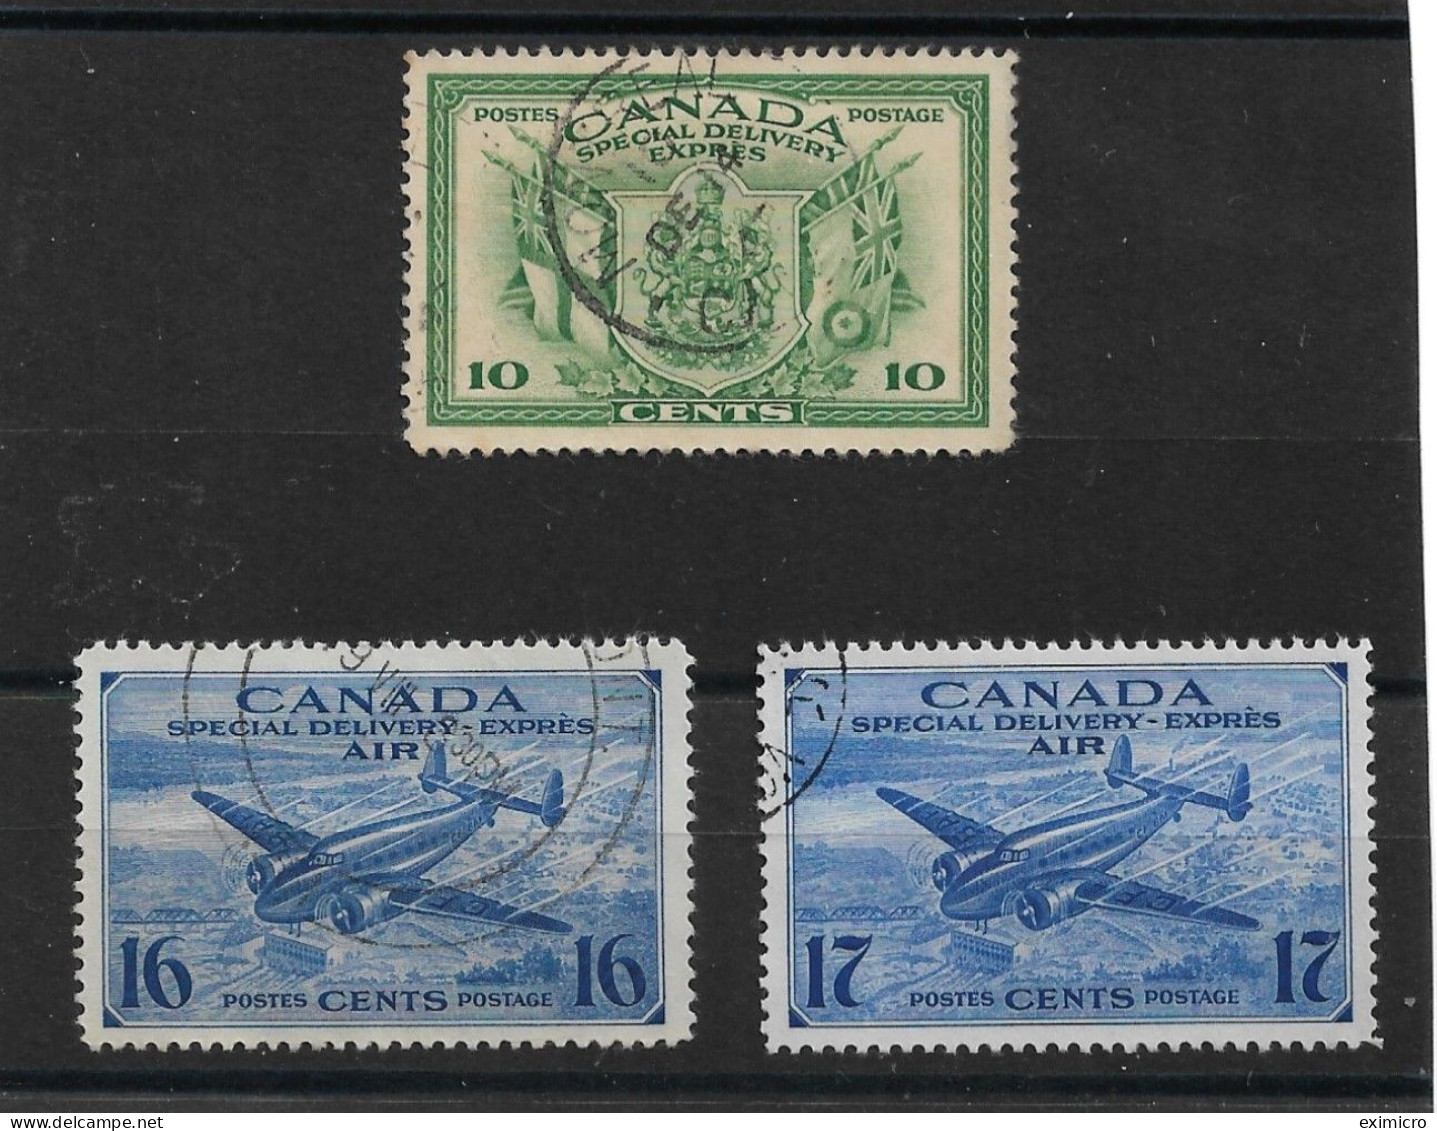 CANADA 1942 - 1943 WAR EFFORT SPECIAL DELIVERY SET SG S12/S14 FINE USED Cat £9 - Exprès